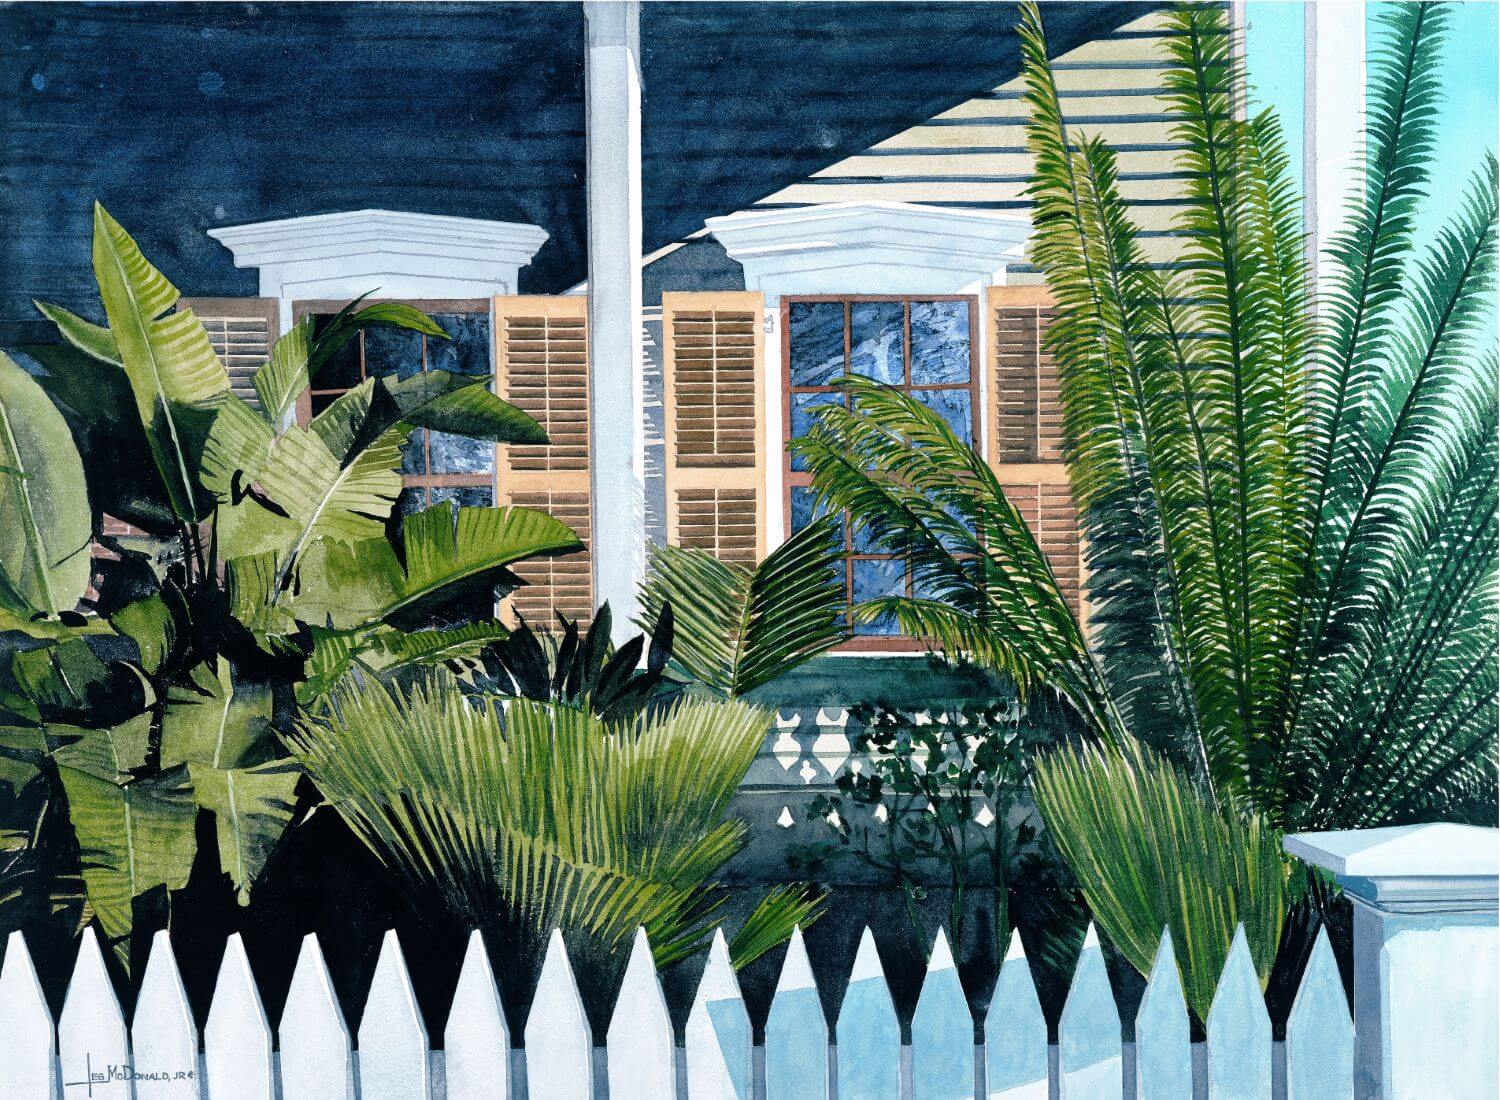 "House of Palms"